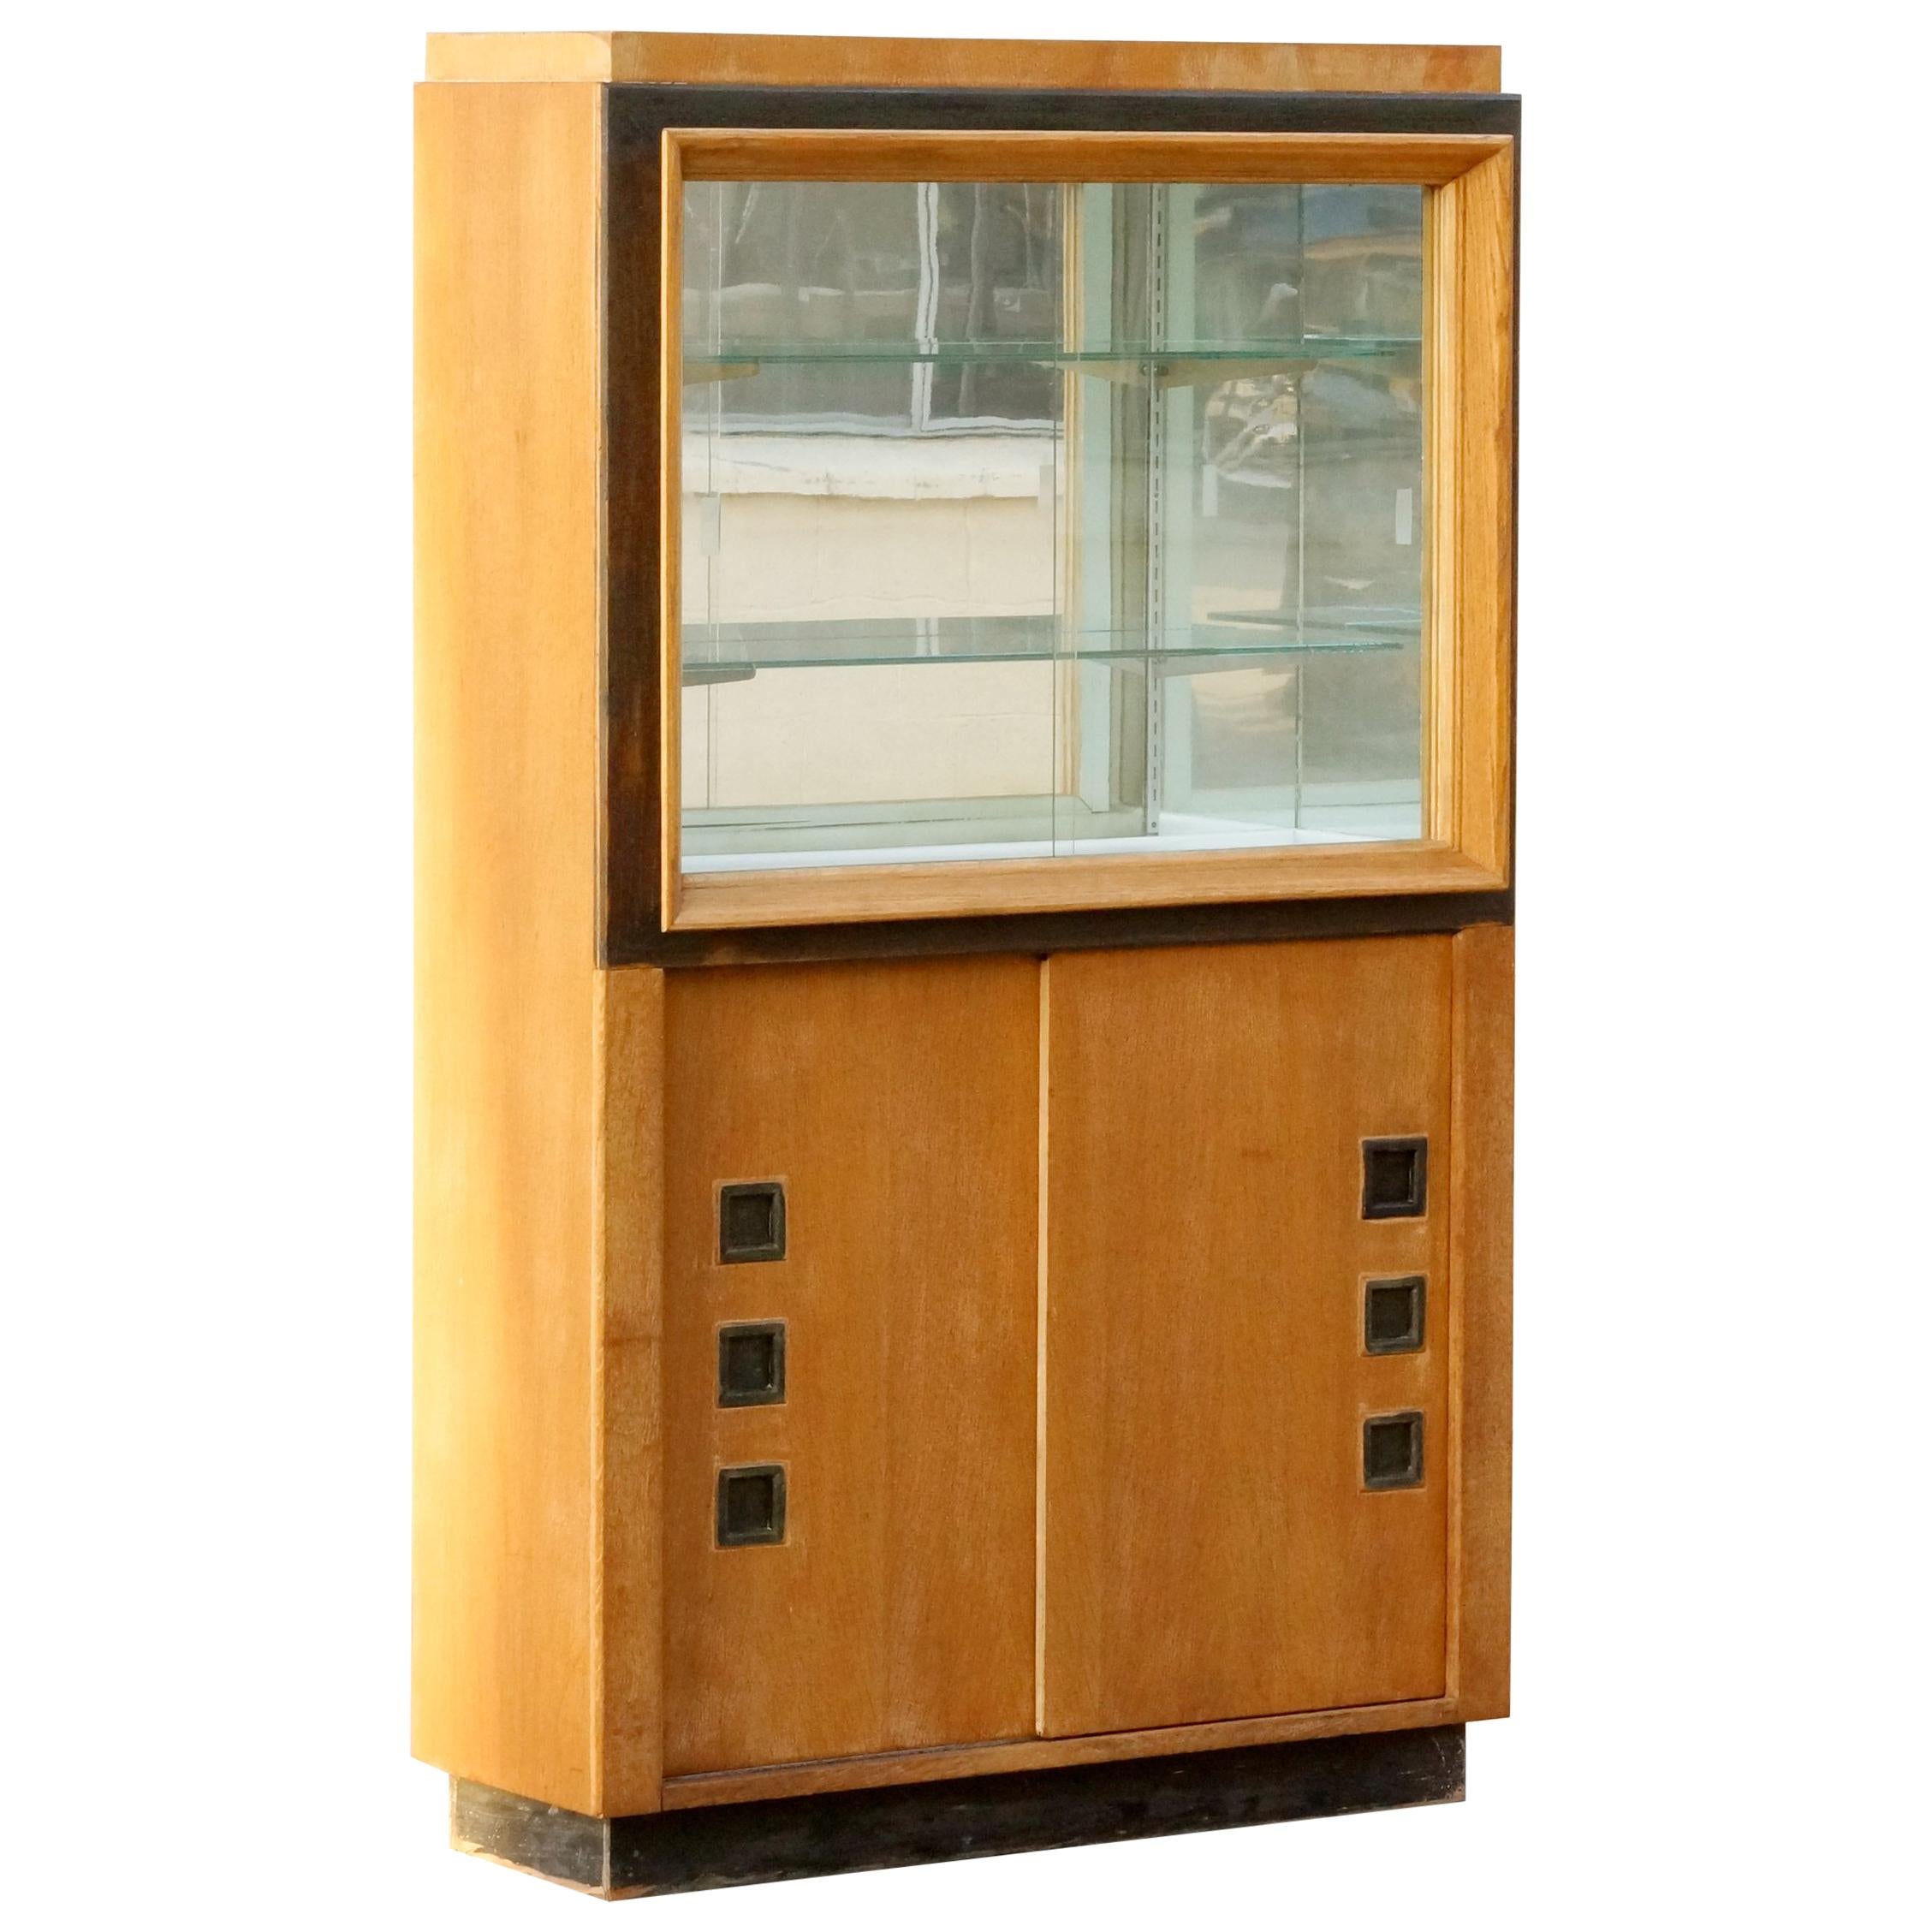 Modernist Display Cabinet in the Style of Paul Laszlo